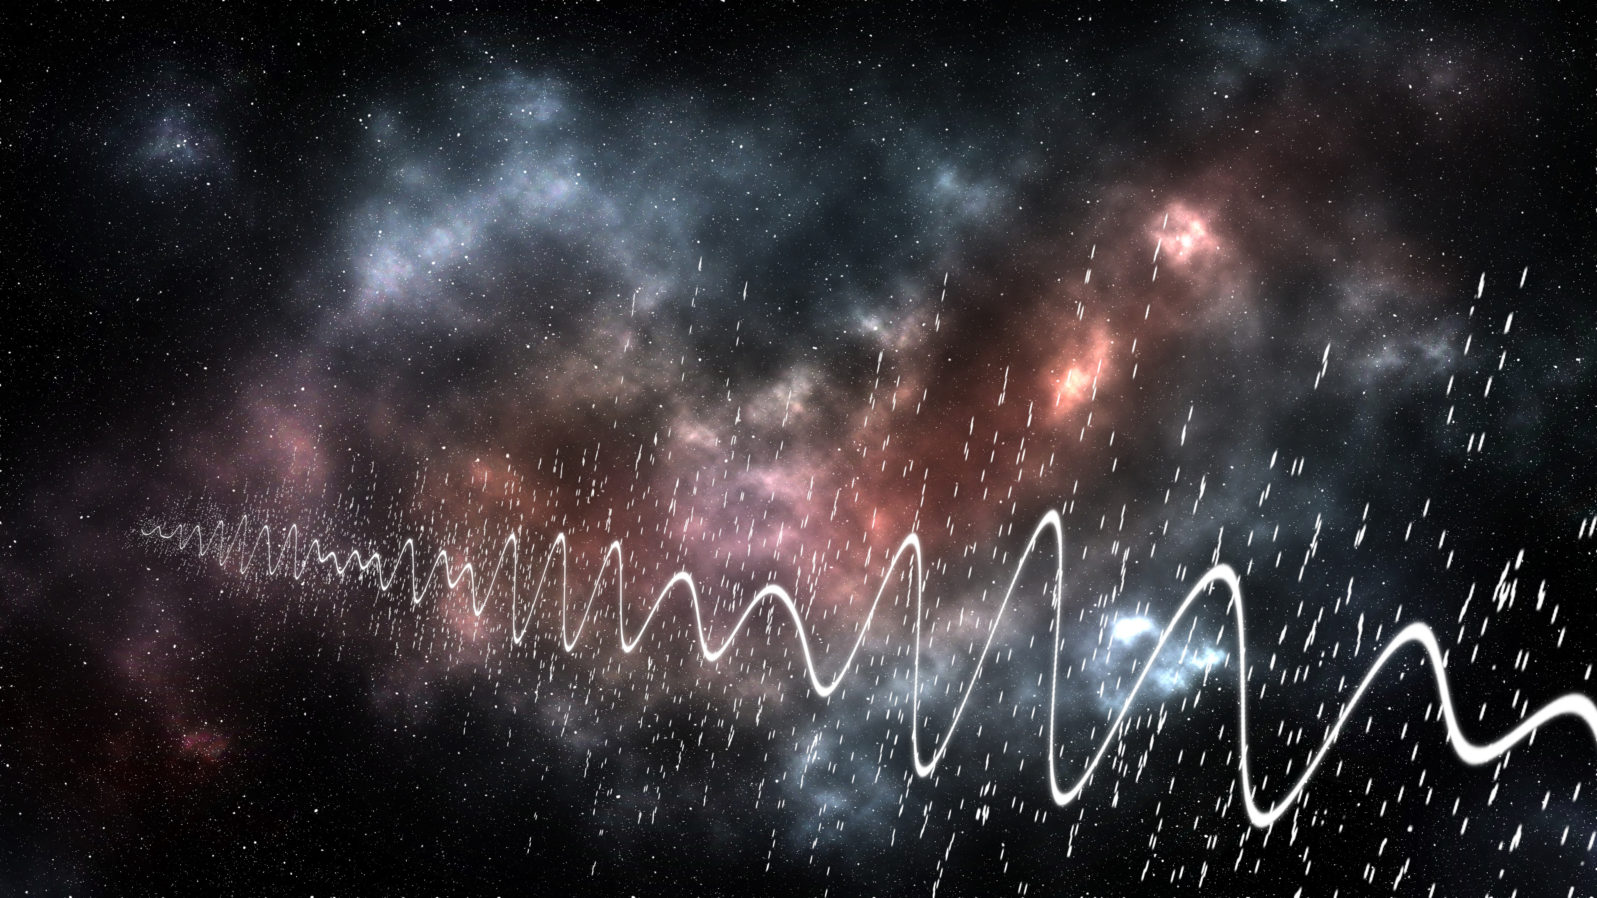 Sci-fi concept image illustration. Unknown origin radio signal waves coming out from deep cosmos space in colorful nebula and millions stars with galaxies universe background